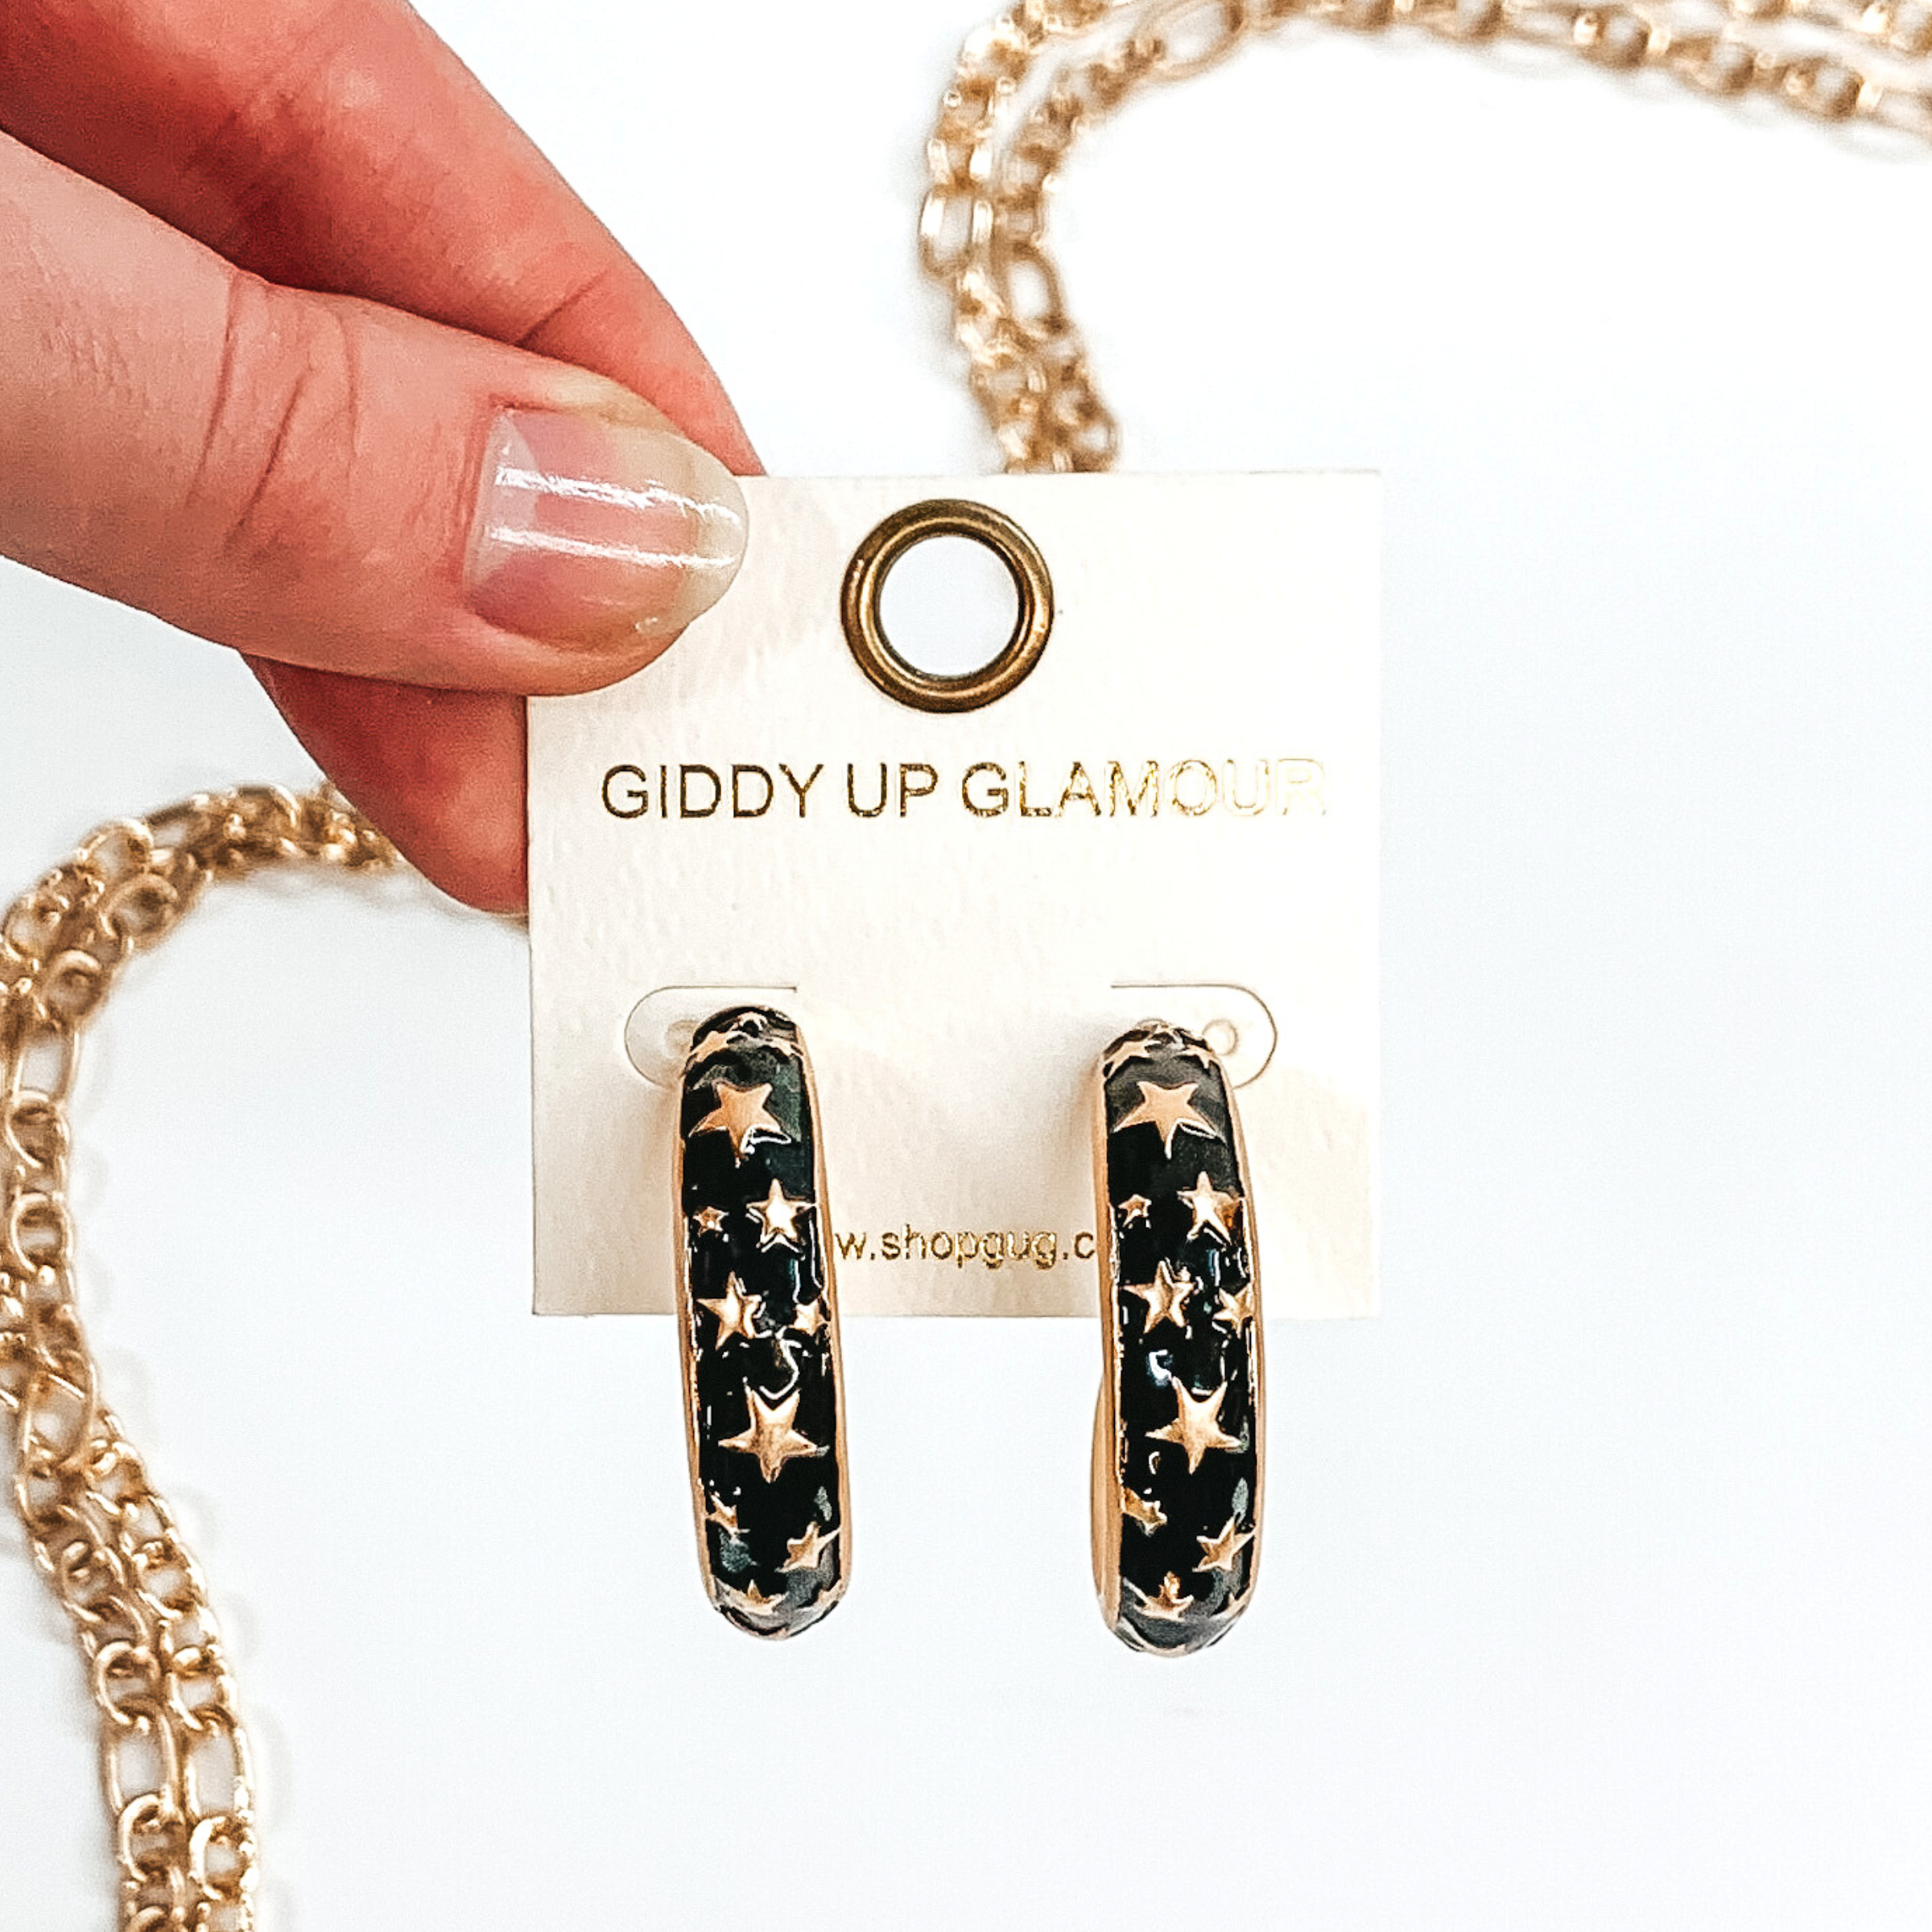 Thick, rounded black hoop earrings with gold outlined and gold star pattern. These earrings are on a white earring holder held by fingers on a white background that has gold chained decor. 